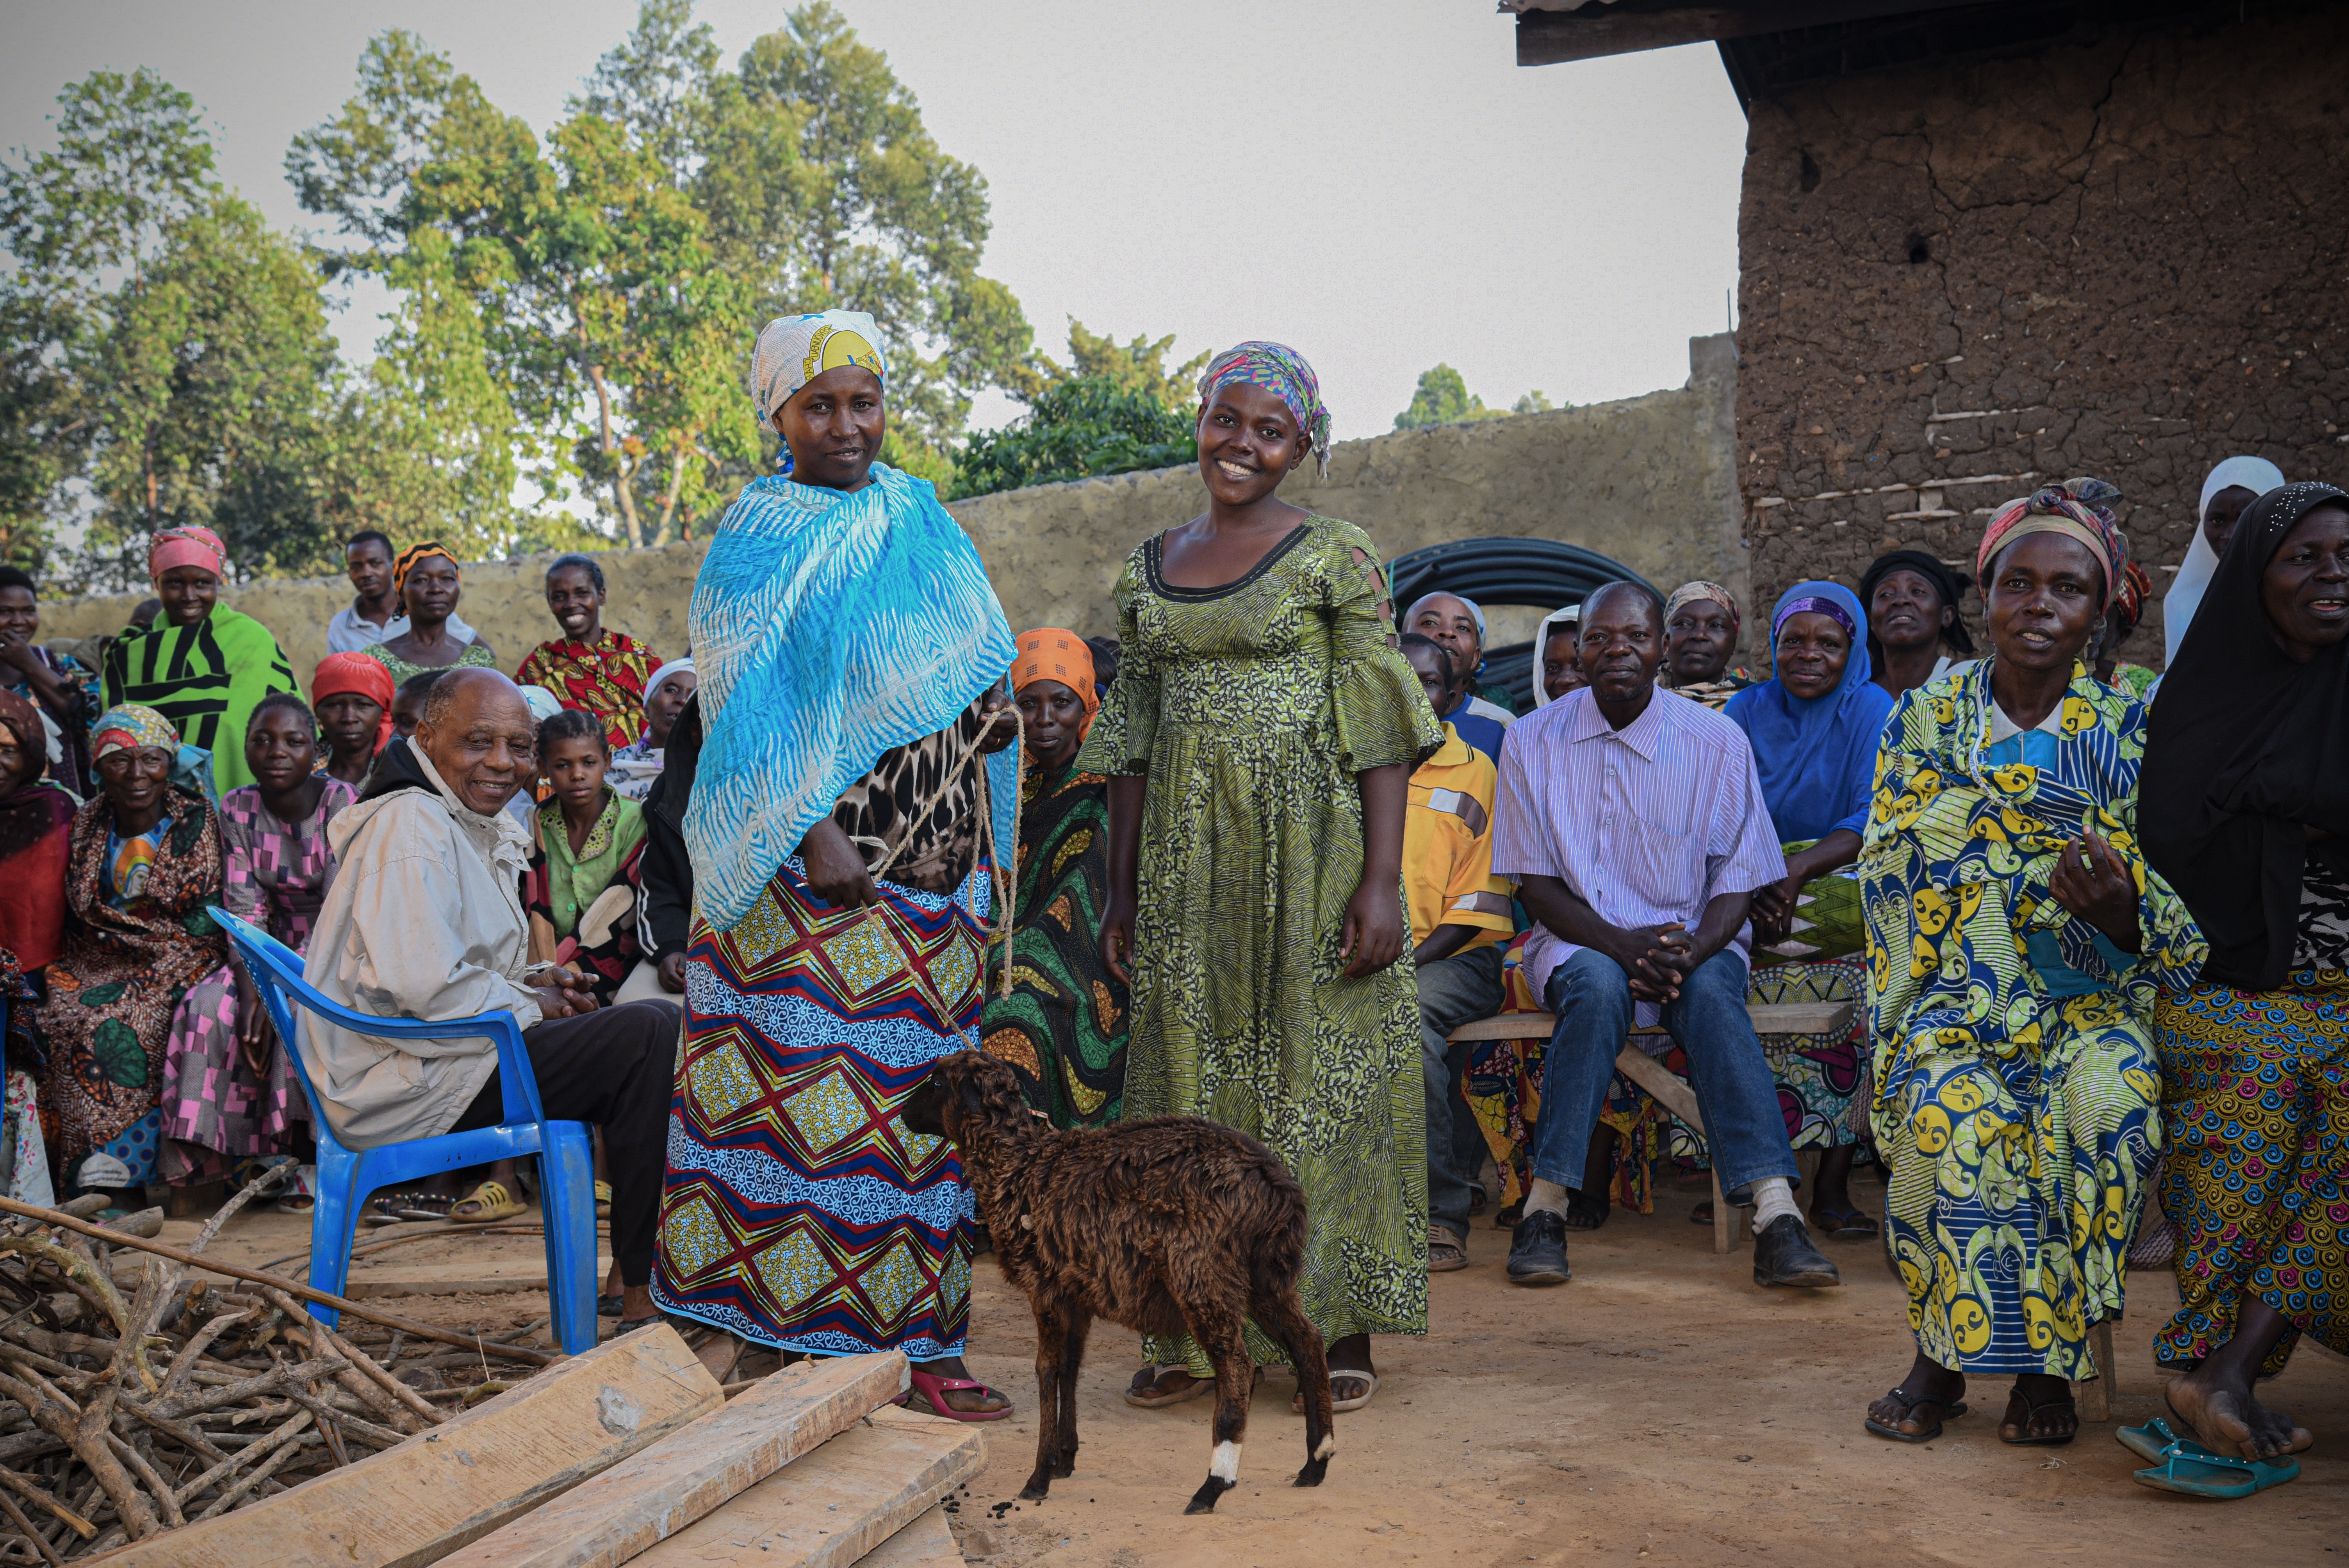 In the Democratic Republic of the Congo, two women smile and stand with a sheep between them. Other community members are around them.